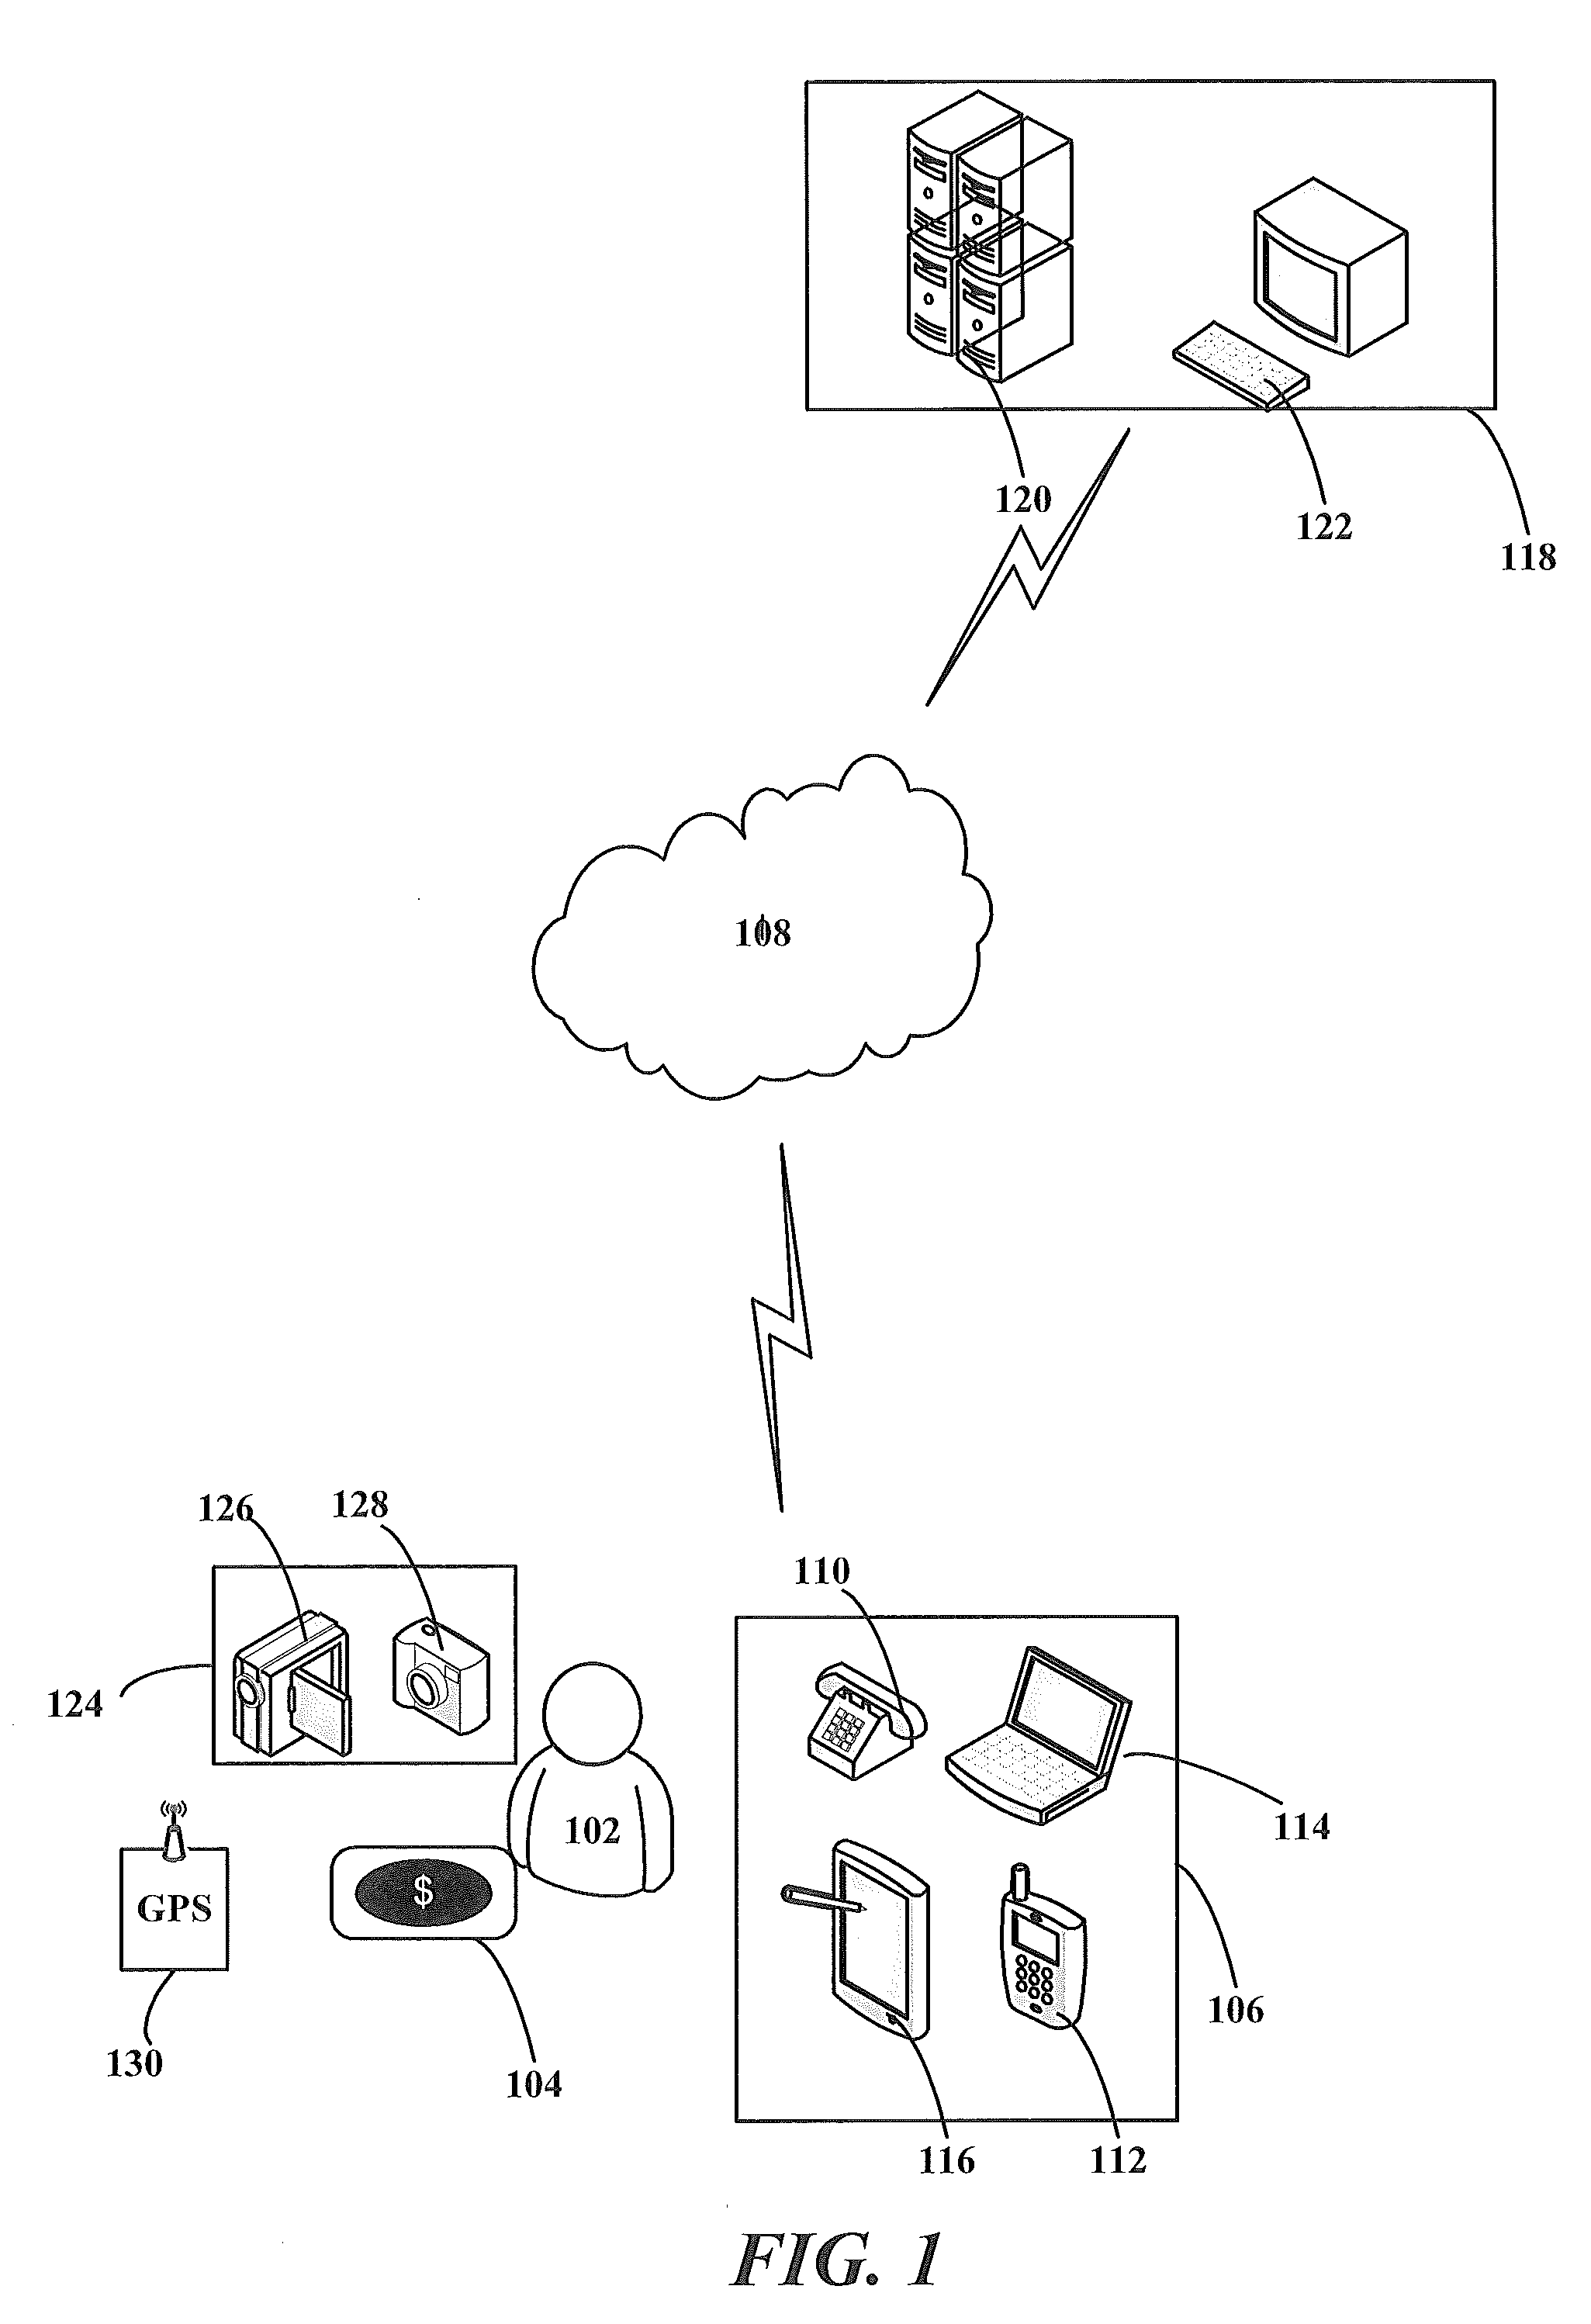 Method for authorizing the activation of a spending card